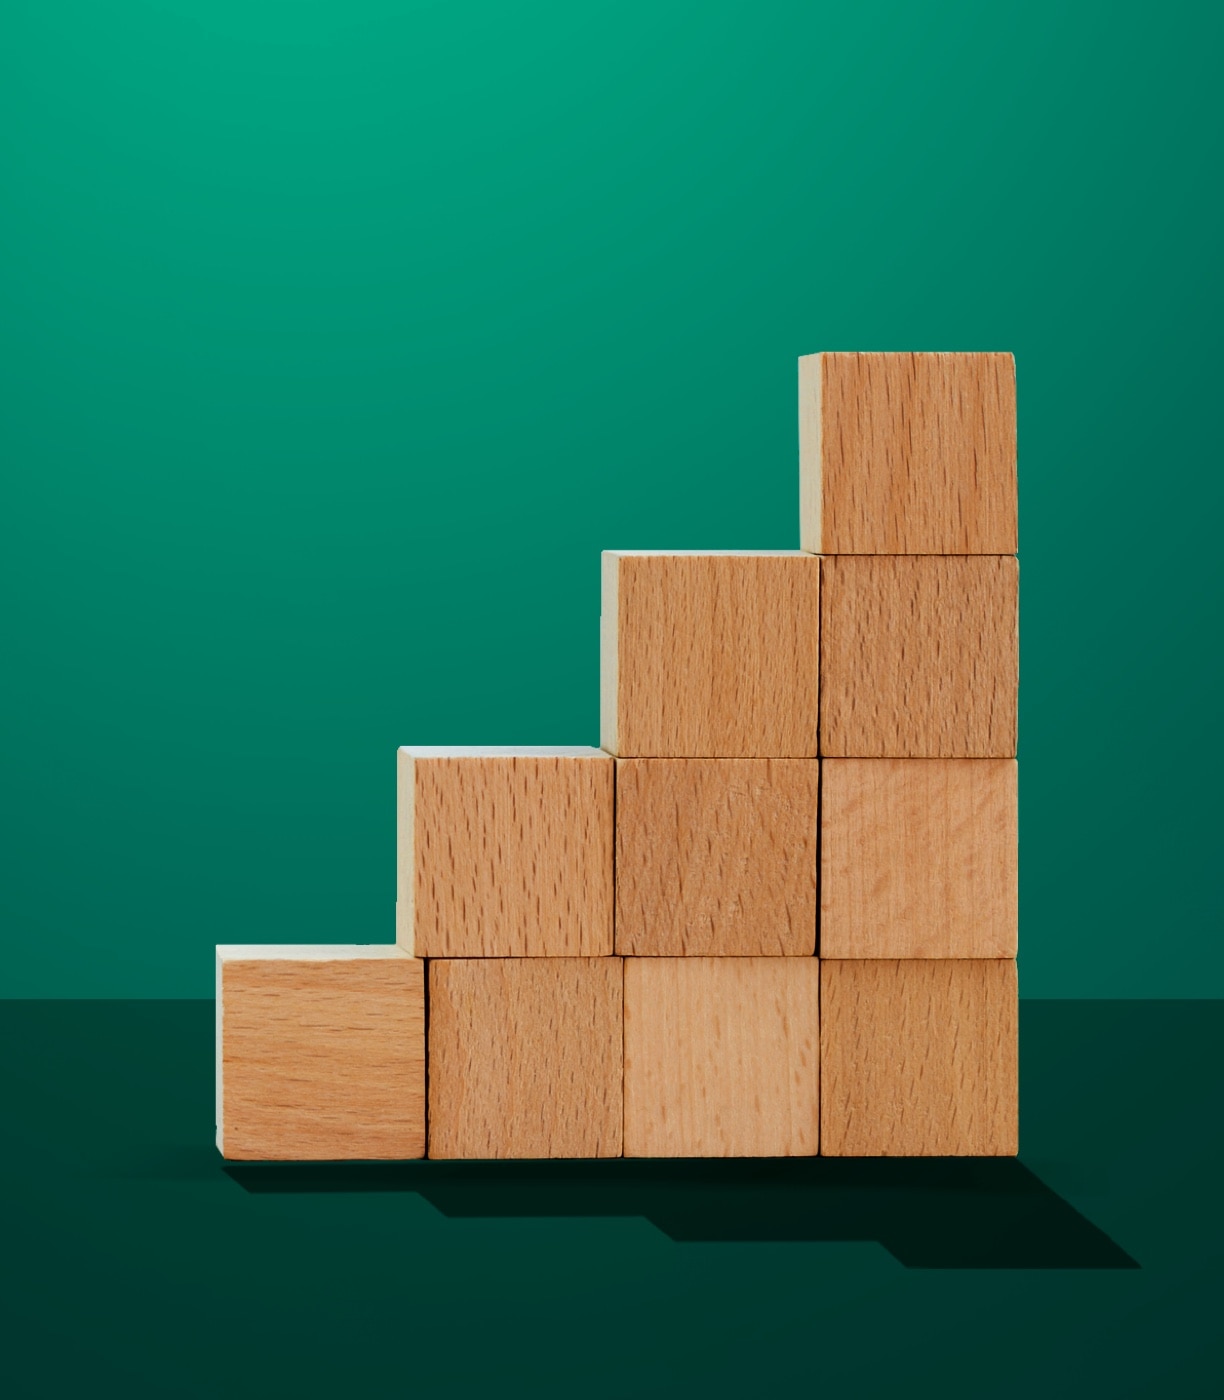 Wooden blocks arranged in a staircase pattern.